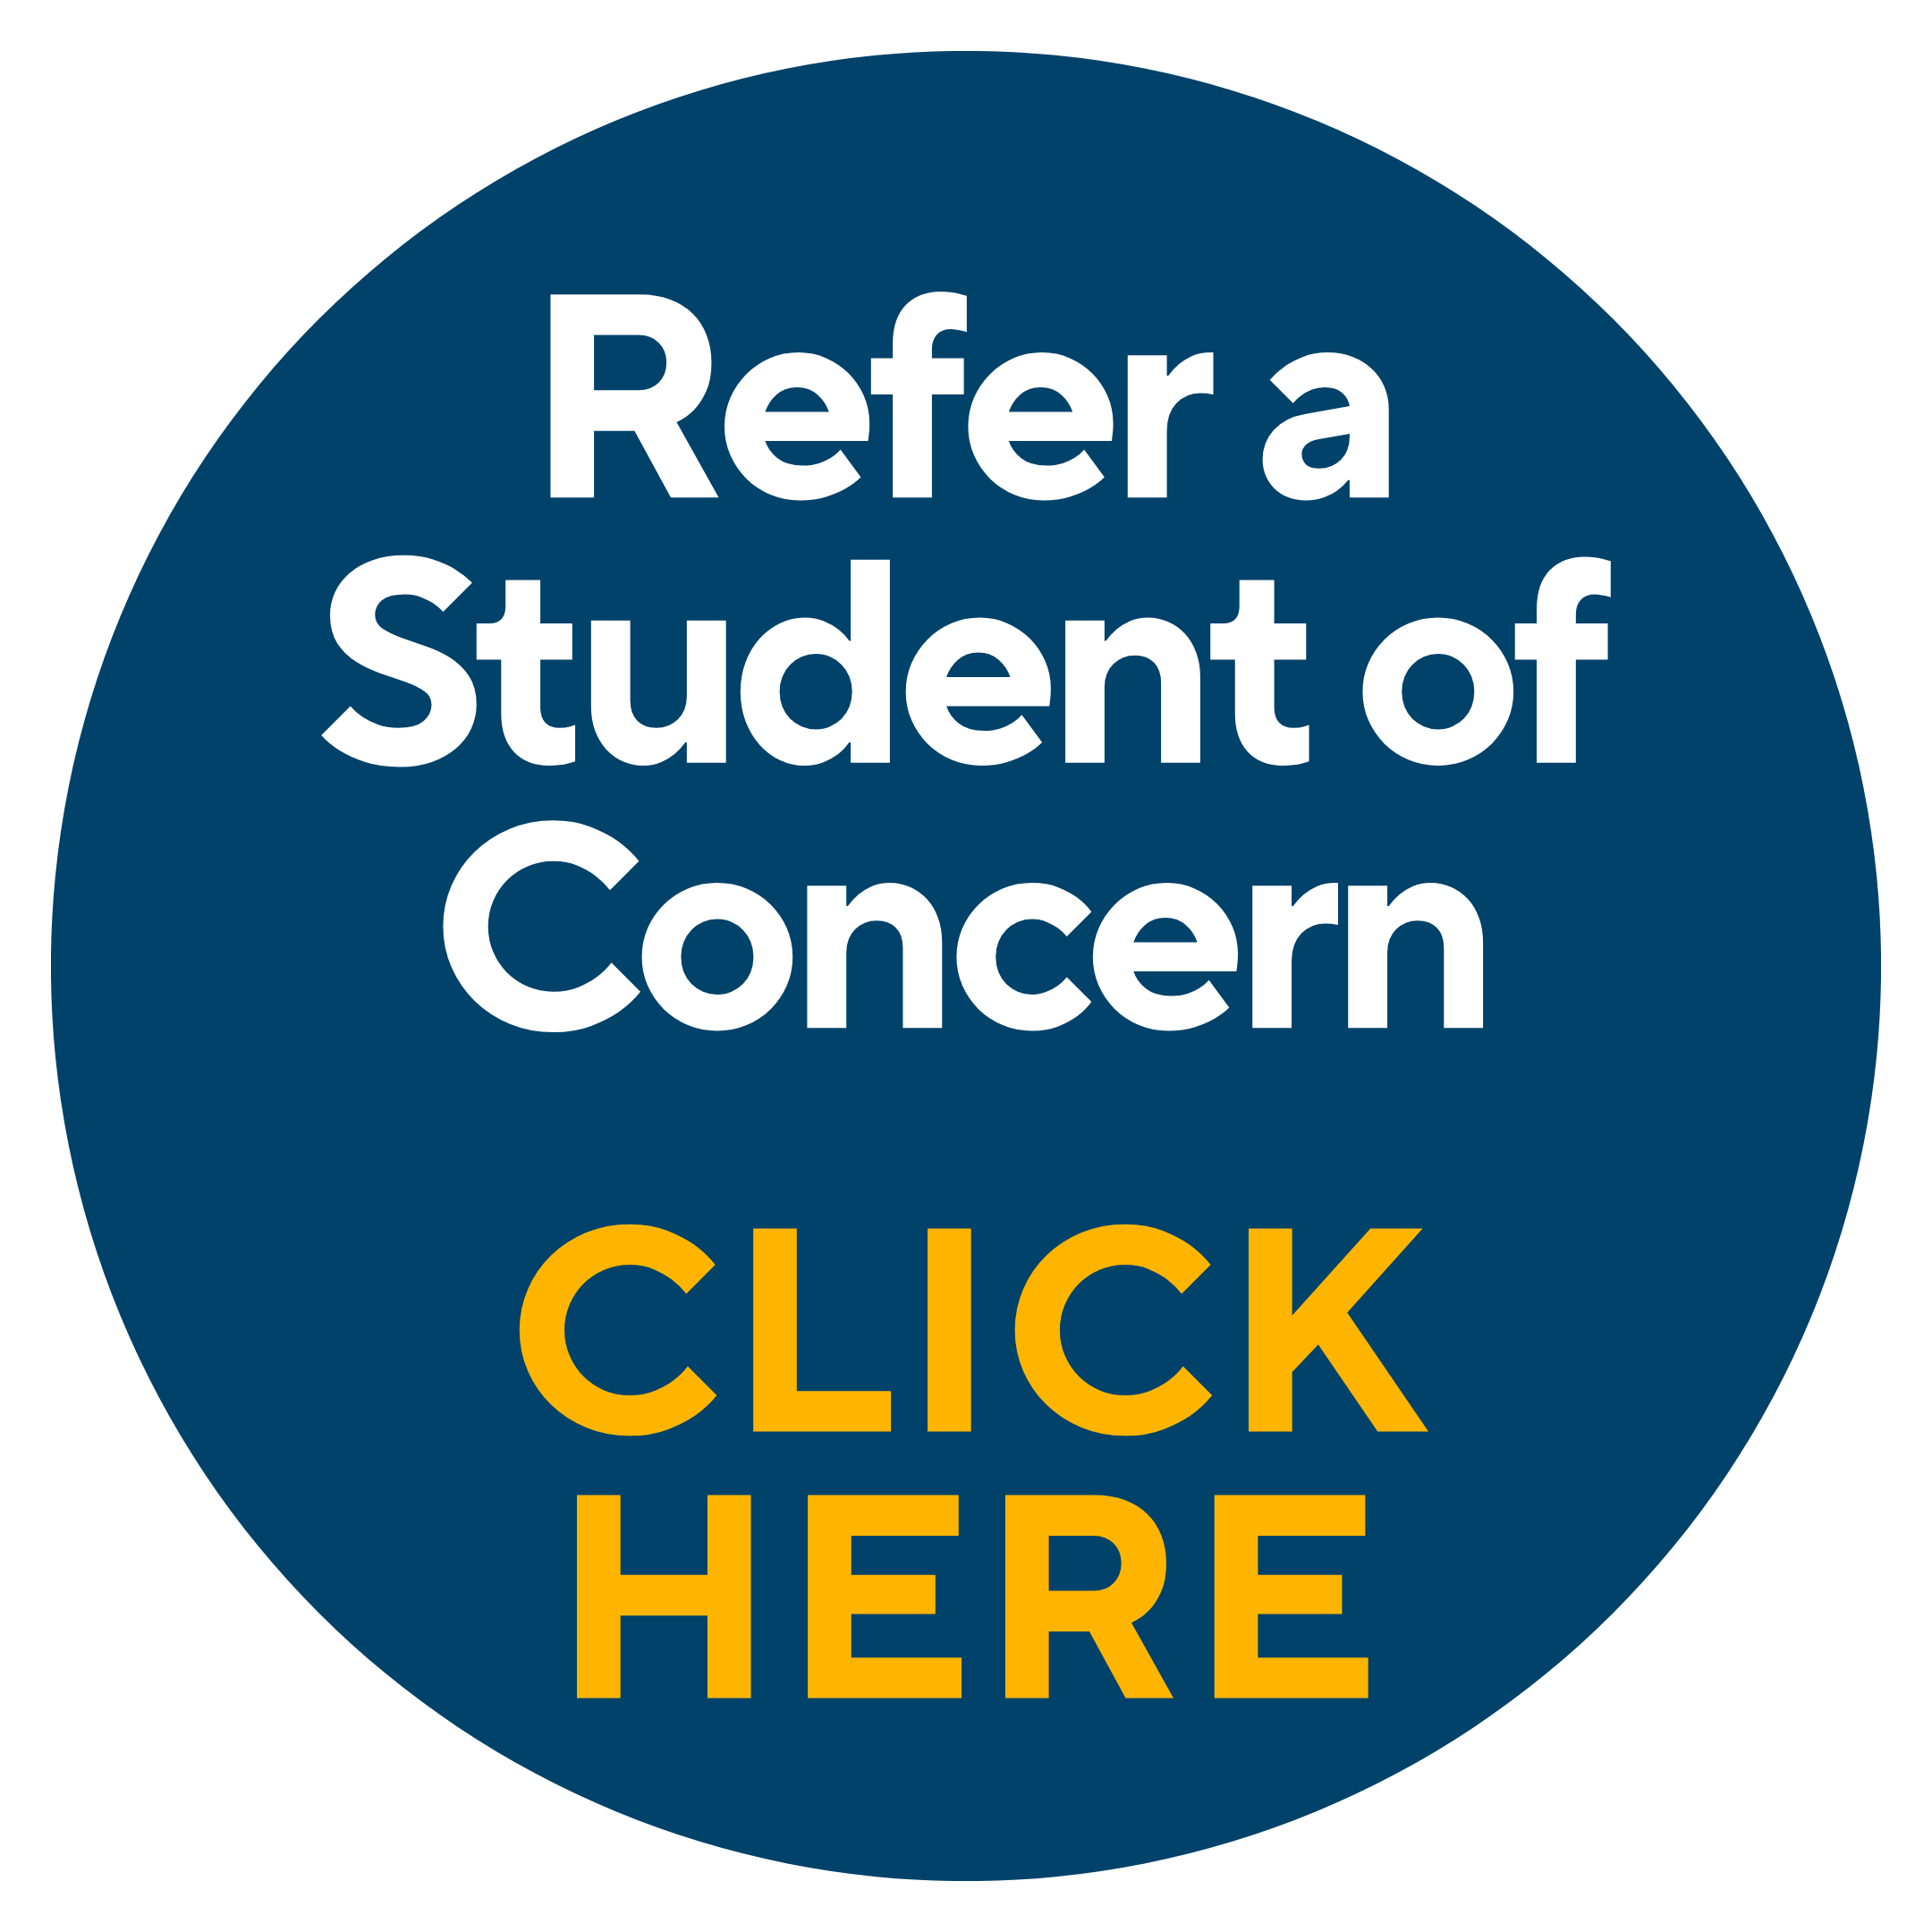 Refer a student of concern